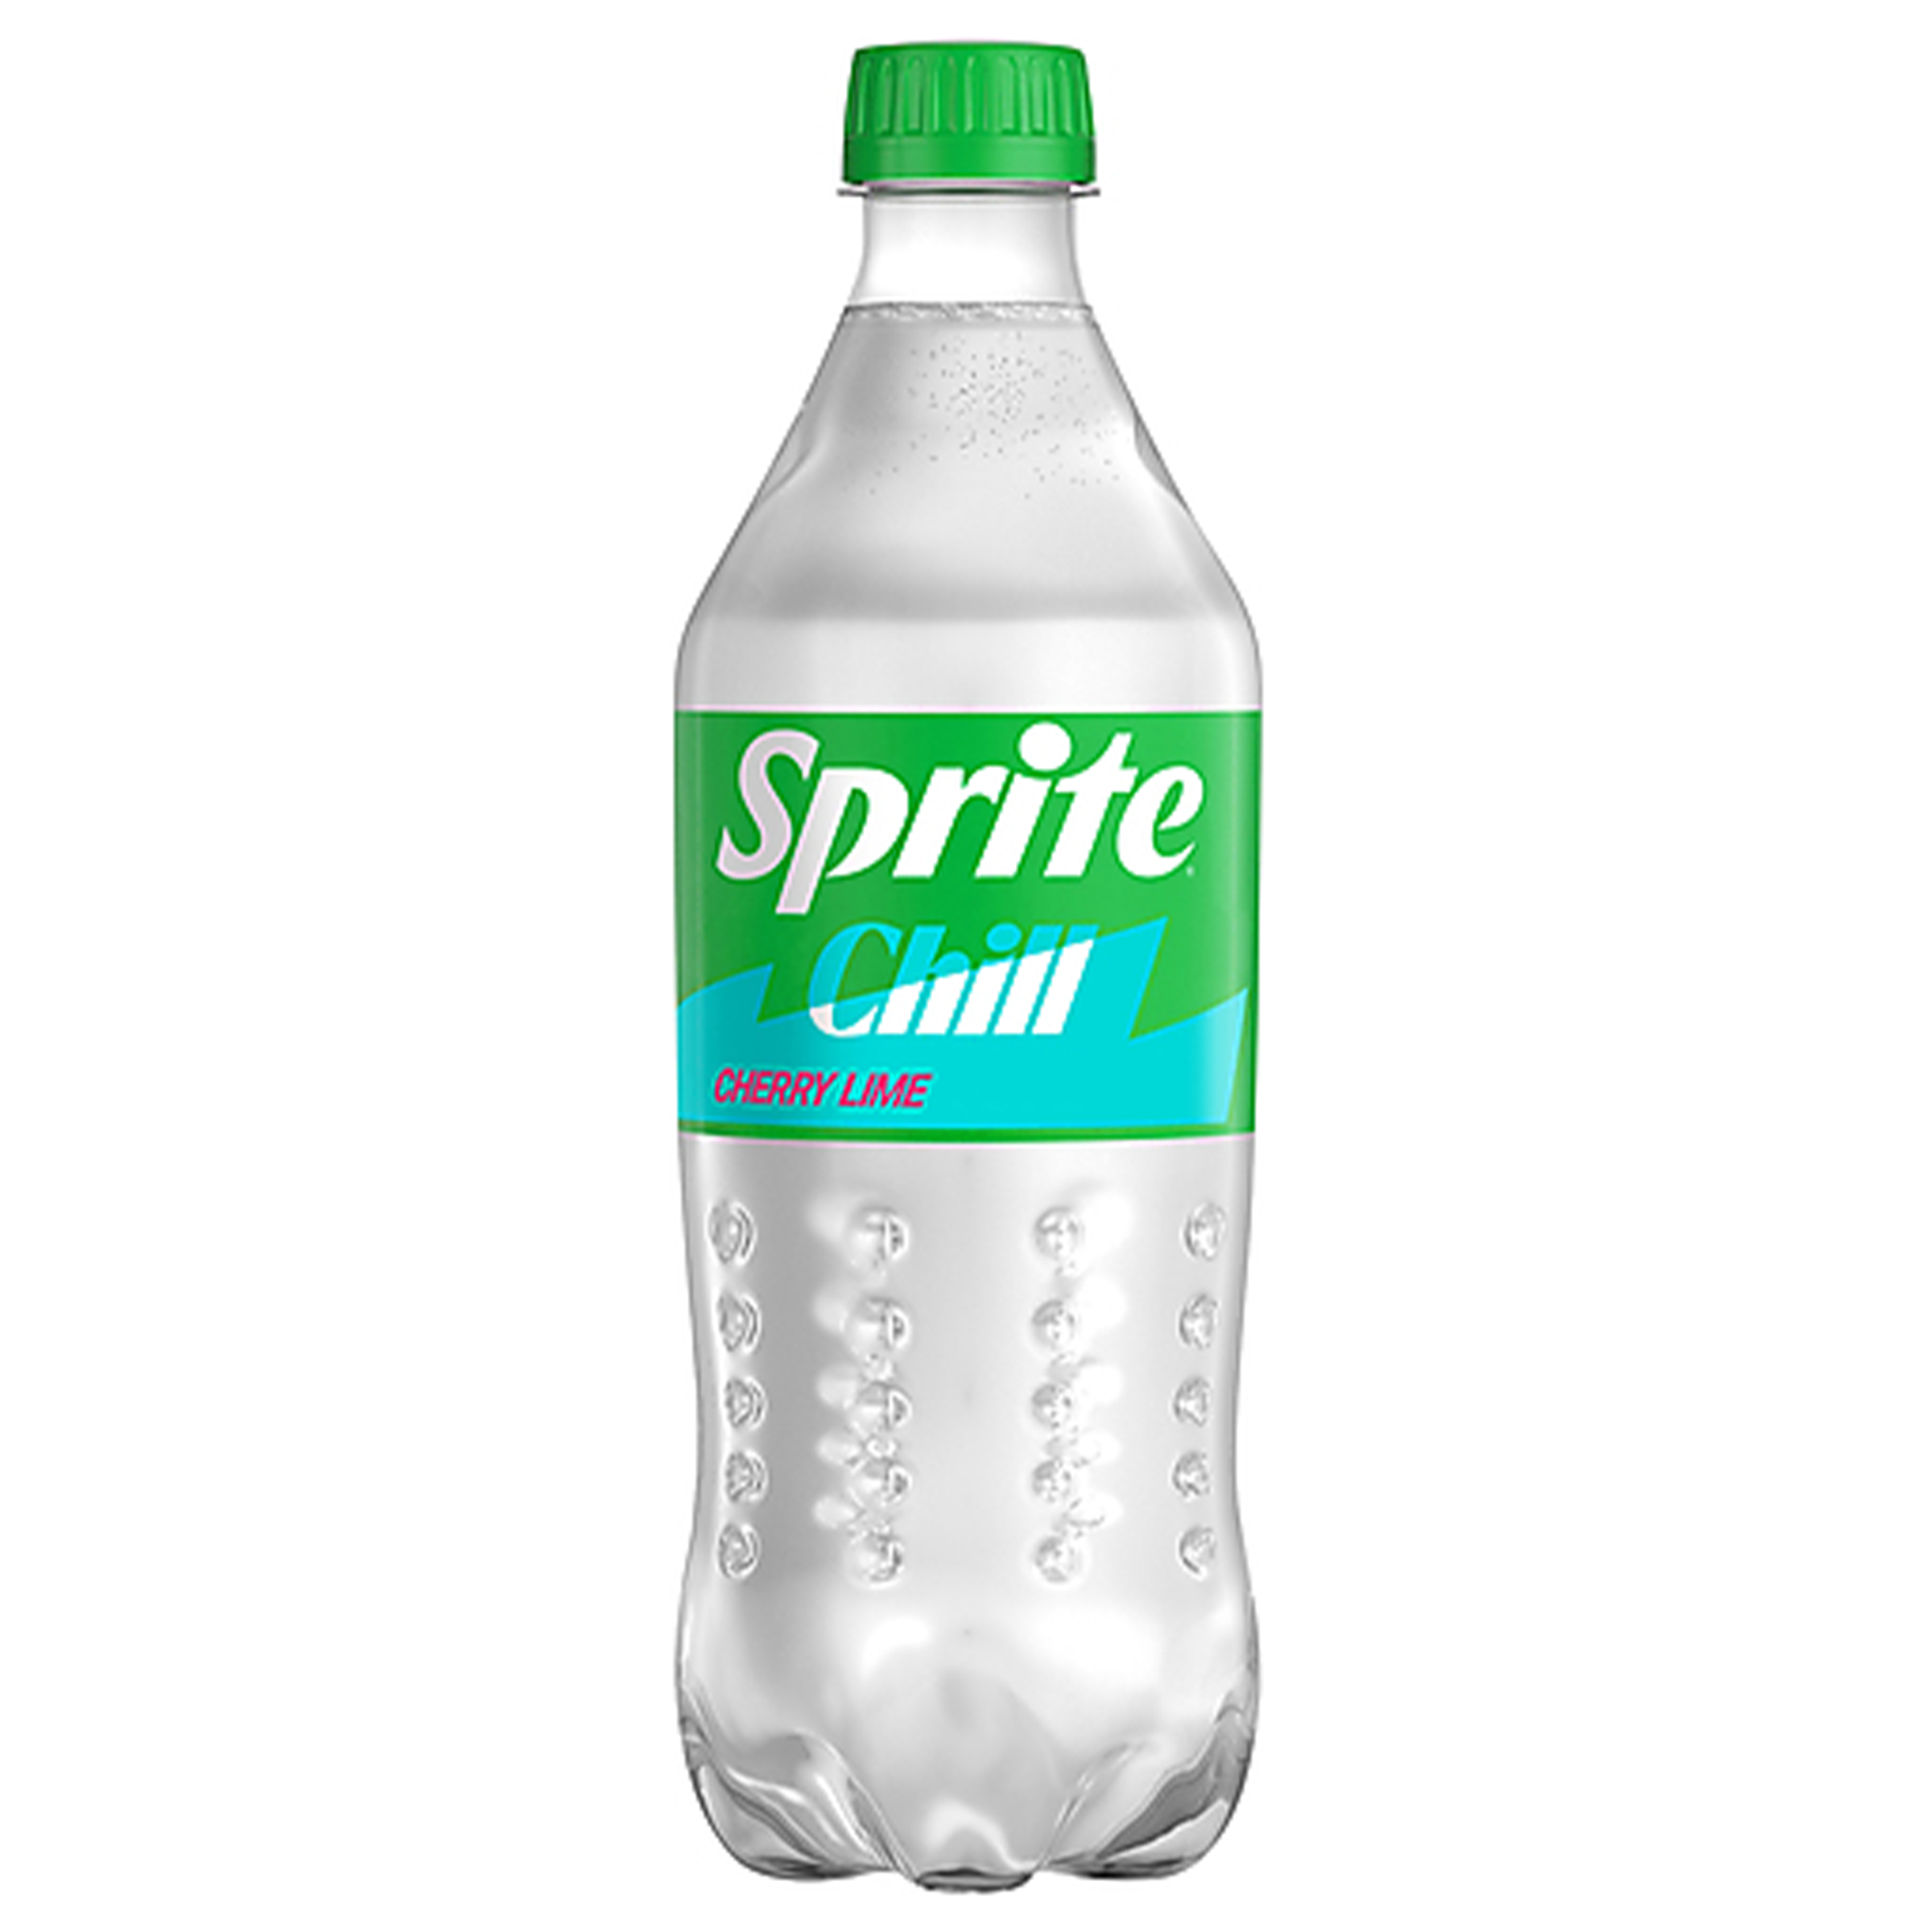 Sprite "Chill" - Cherry Lime